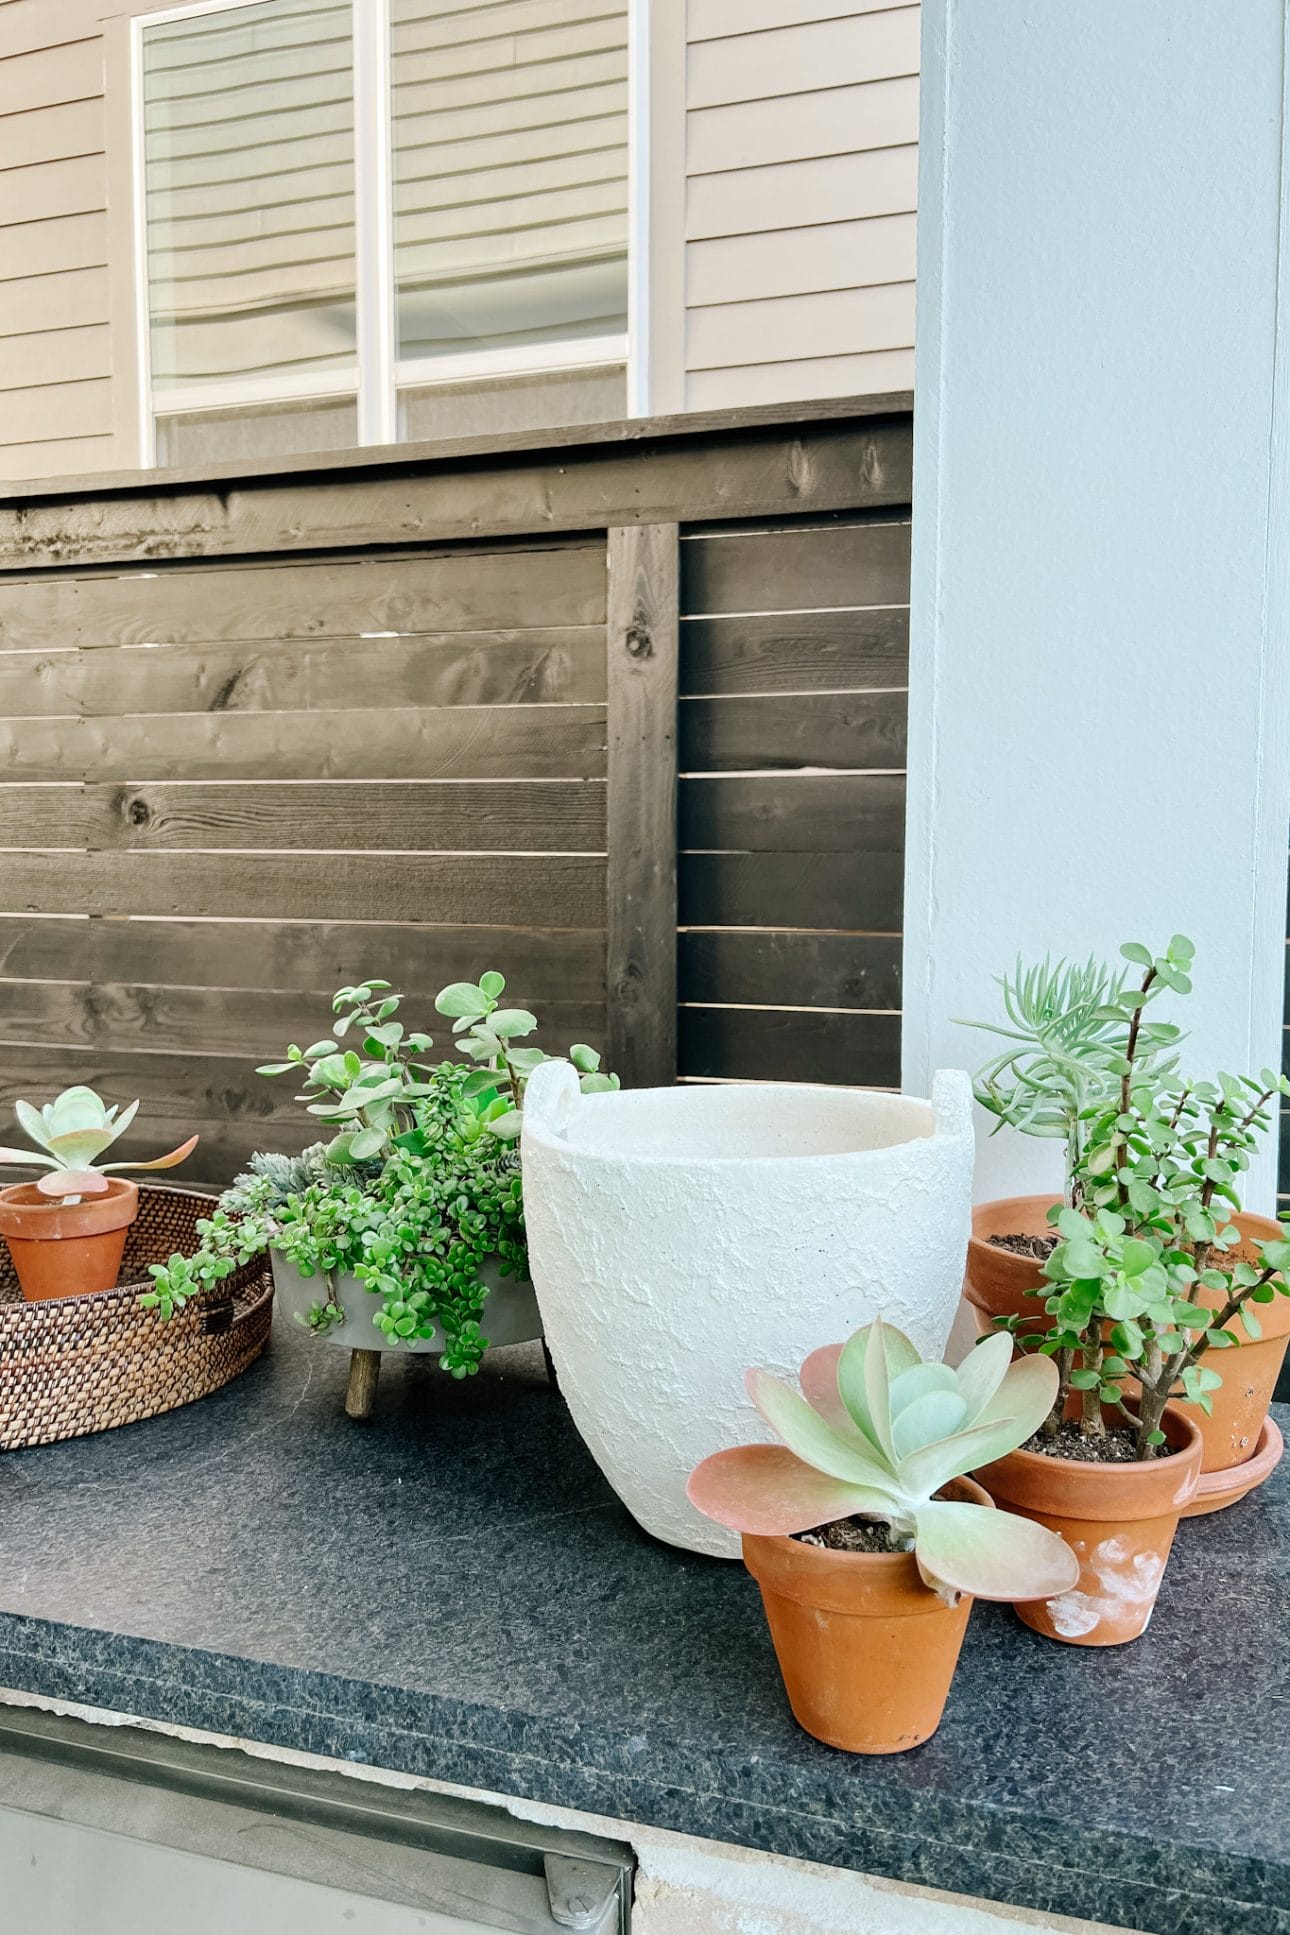 Pots for outdoor flowers